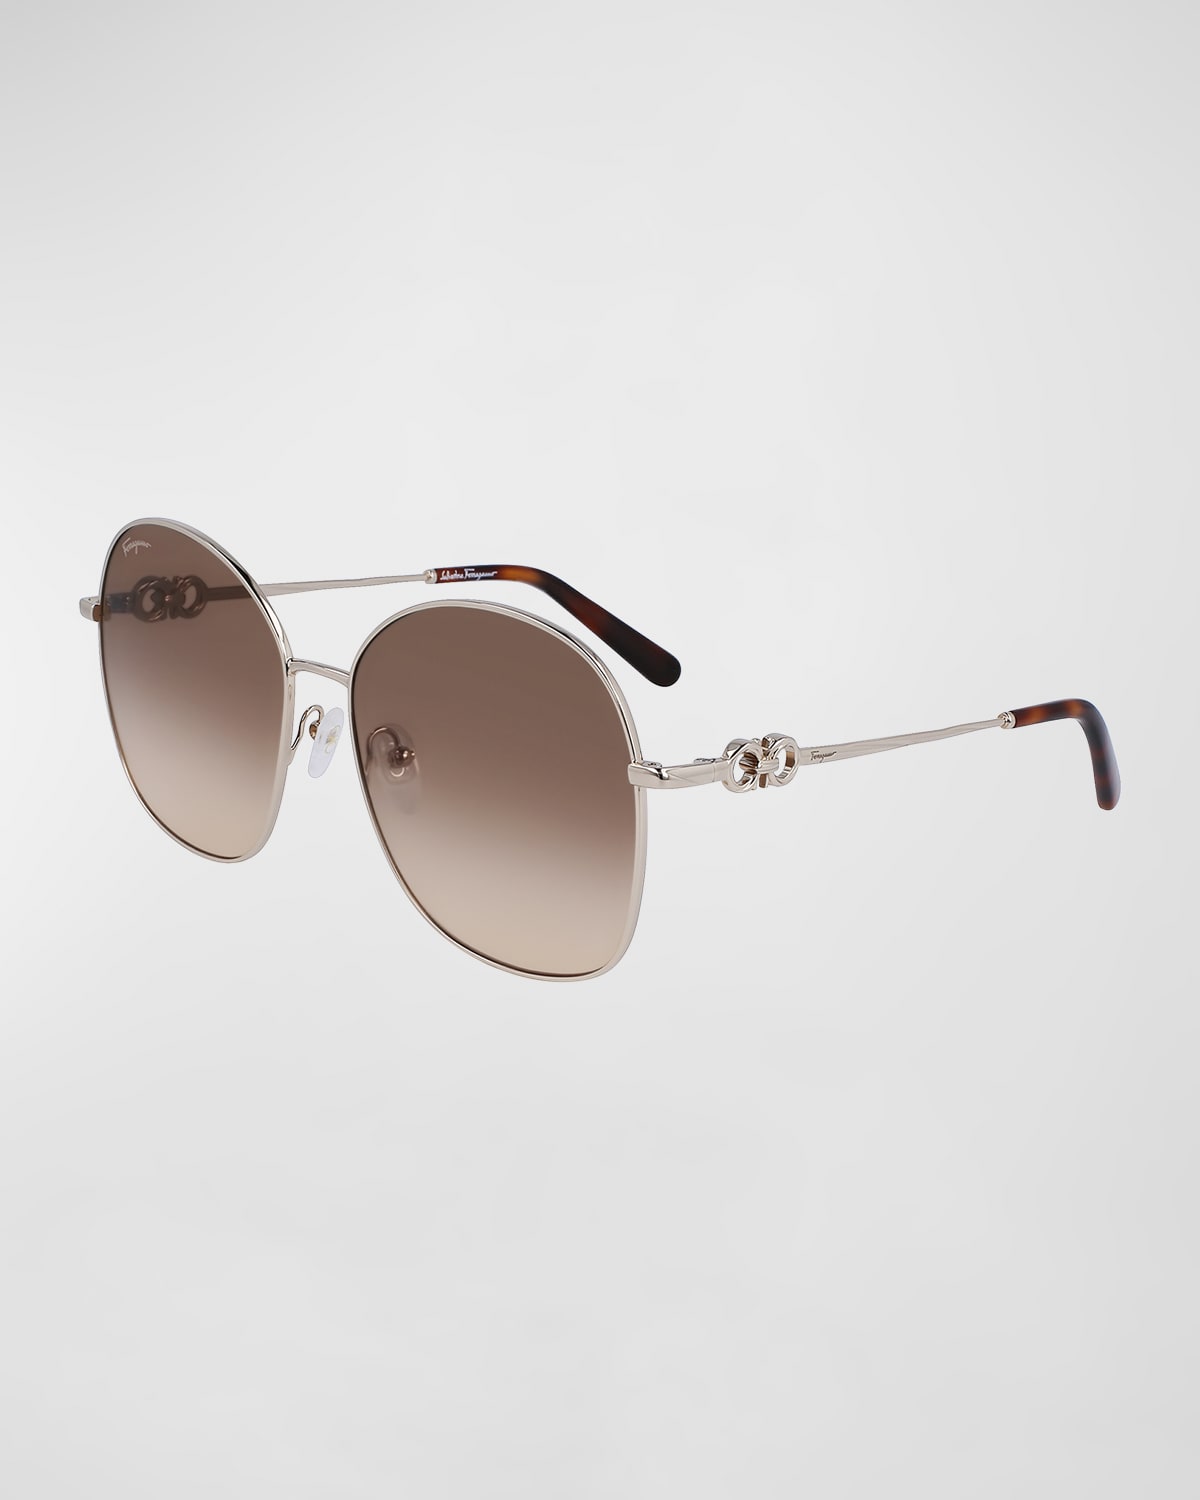 Ferragamo Gancini Rounded Oversized Square Metal Sunglasses In Gold/brown Sand G